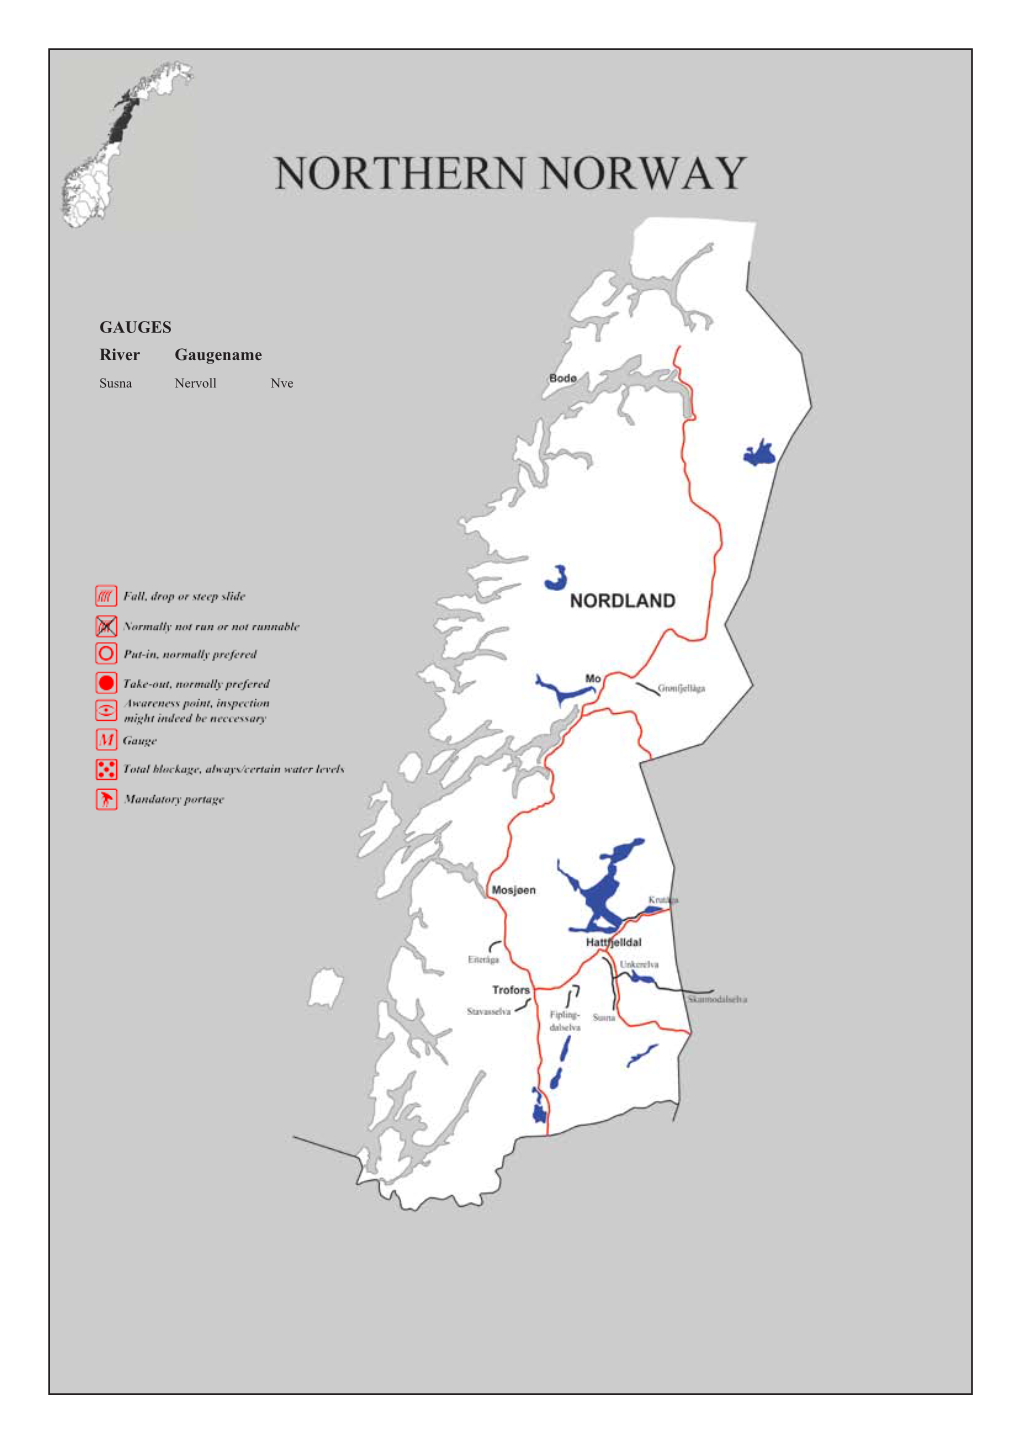 GAUGES River Gaugename Susna Nervoll Nve NORTHERN NORWAY the Geographical Area Northern Norway, Covers the Counties Nordland, Troms and Finnmark